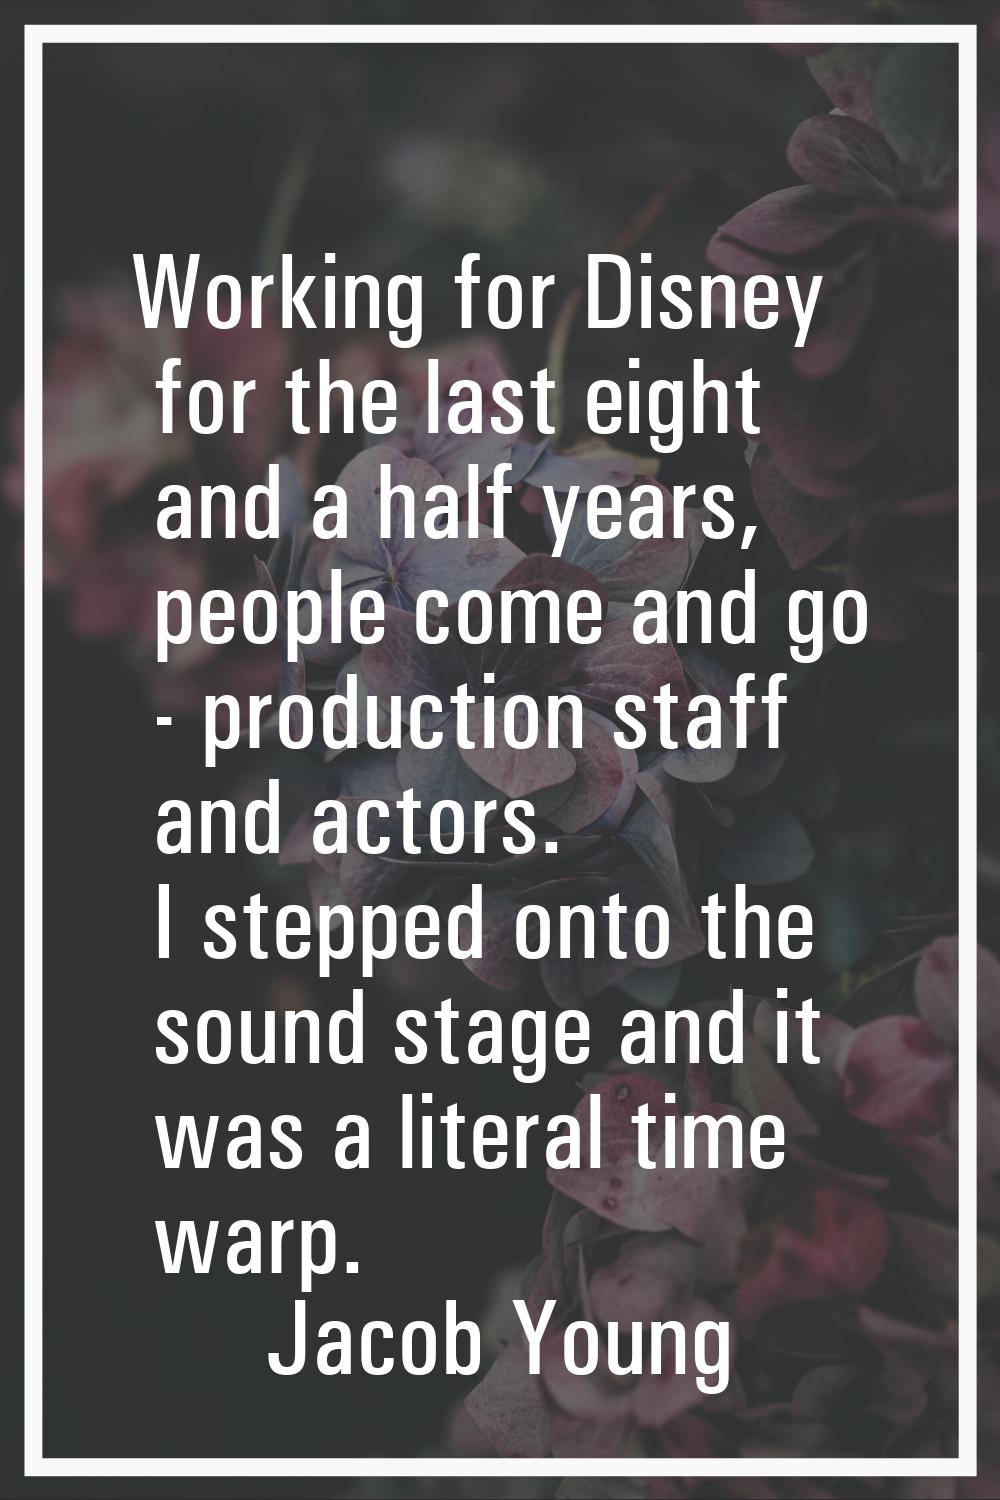 Working for Disney for the last eight and a half years, people come and go - production staff and a